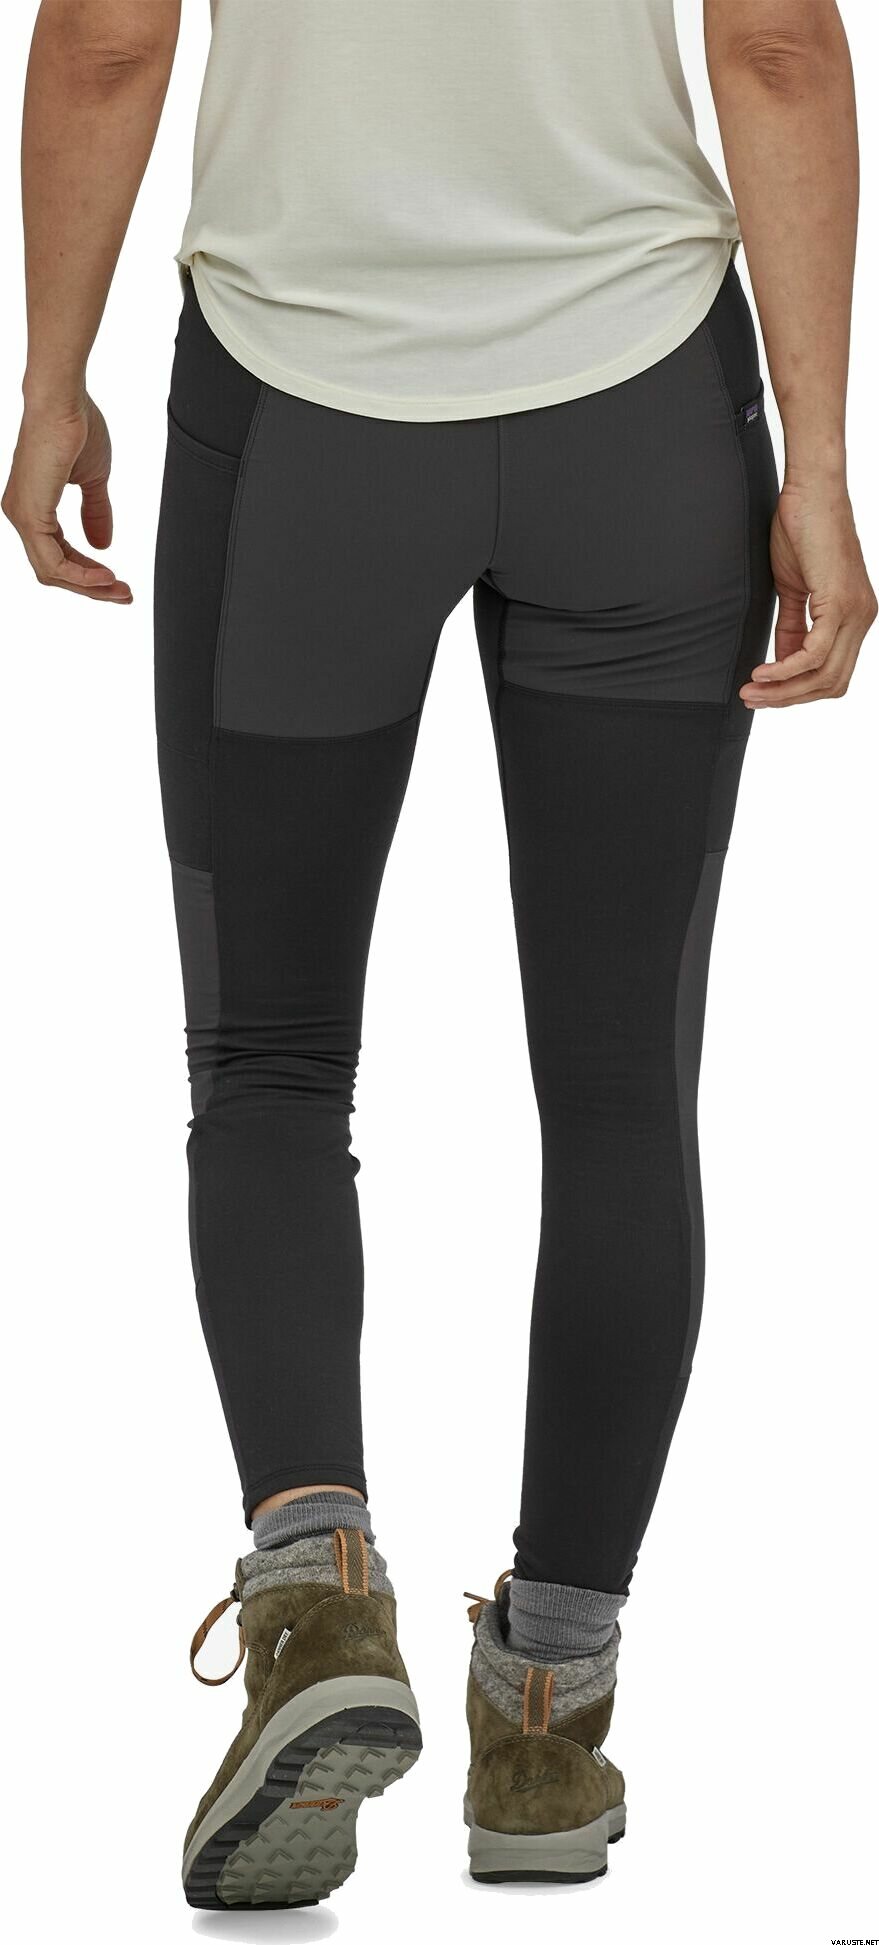 Patagonia Pack Out Hike Tights Womens  Женские походные брюки